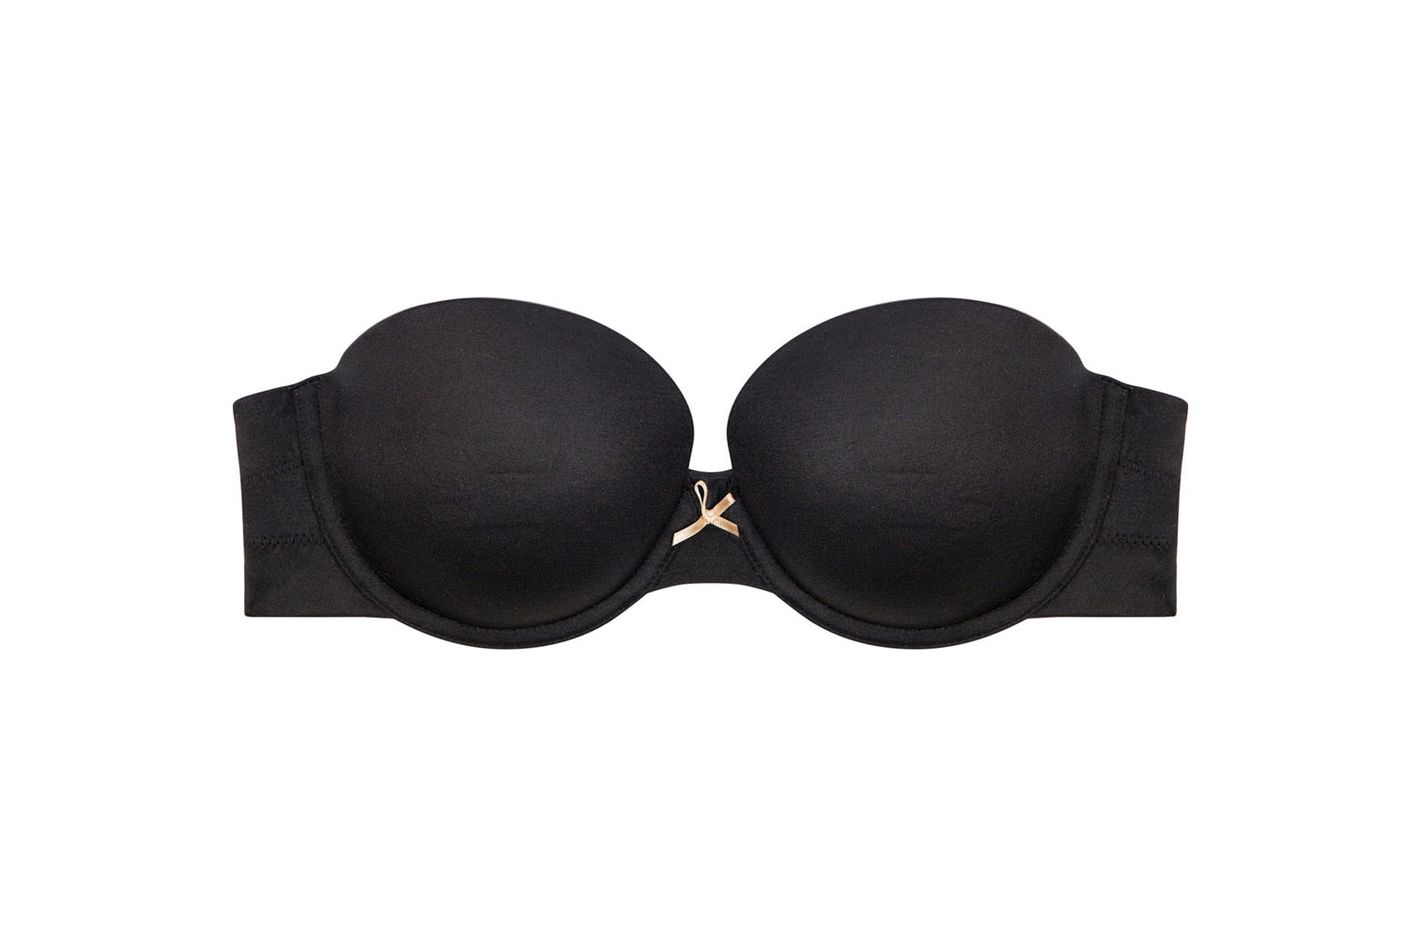 I've got big boobs and I've found the perfect 'strapless bra' from